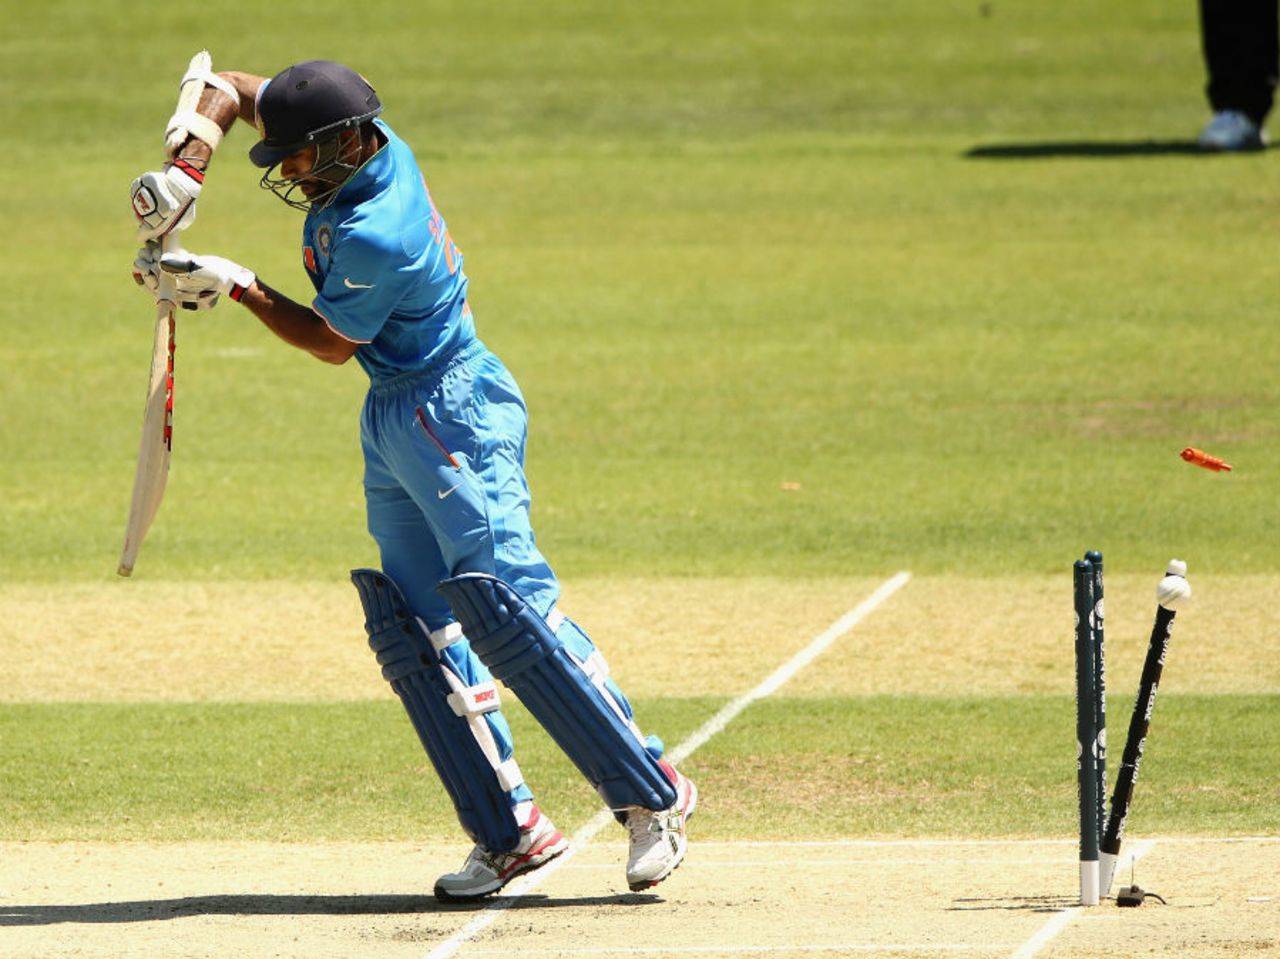 Shikhar Dhawan is bowled by Hamid Hassan, Afghanistan v India, World Cup warm-ups, Adelaide, February 10, 2015